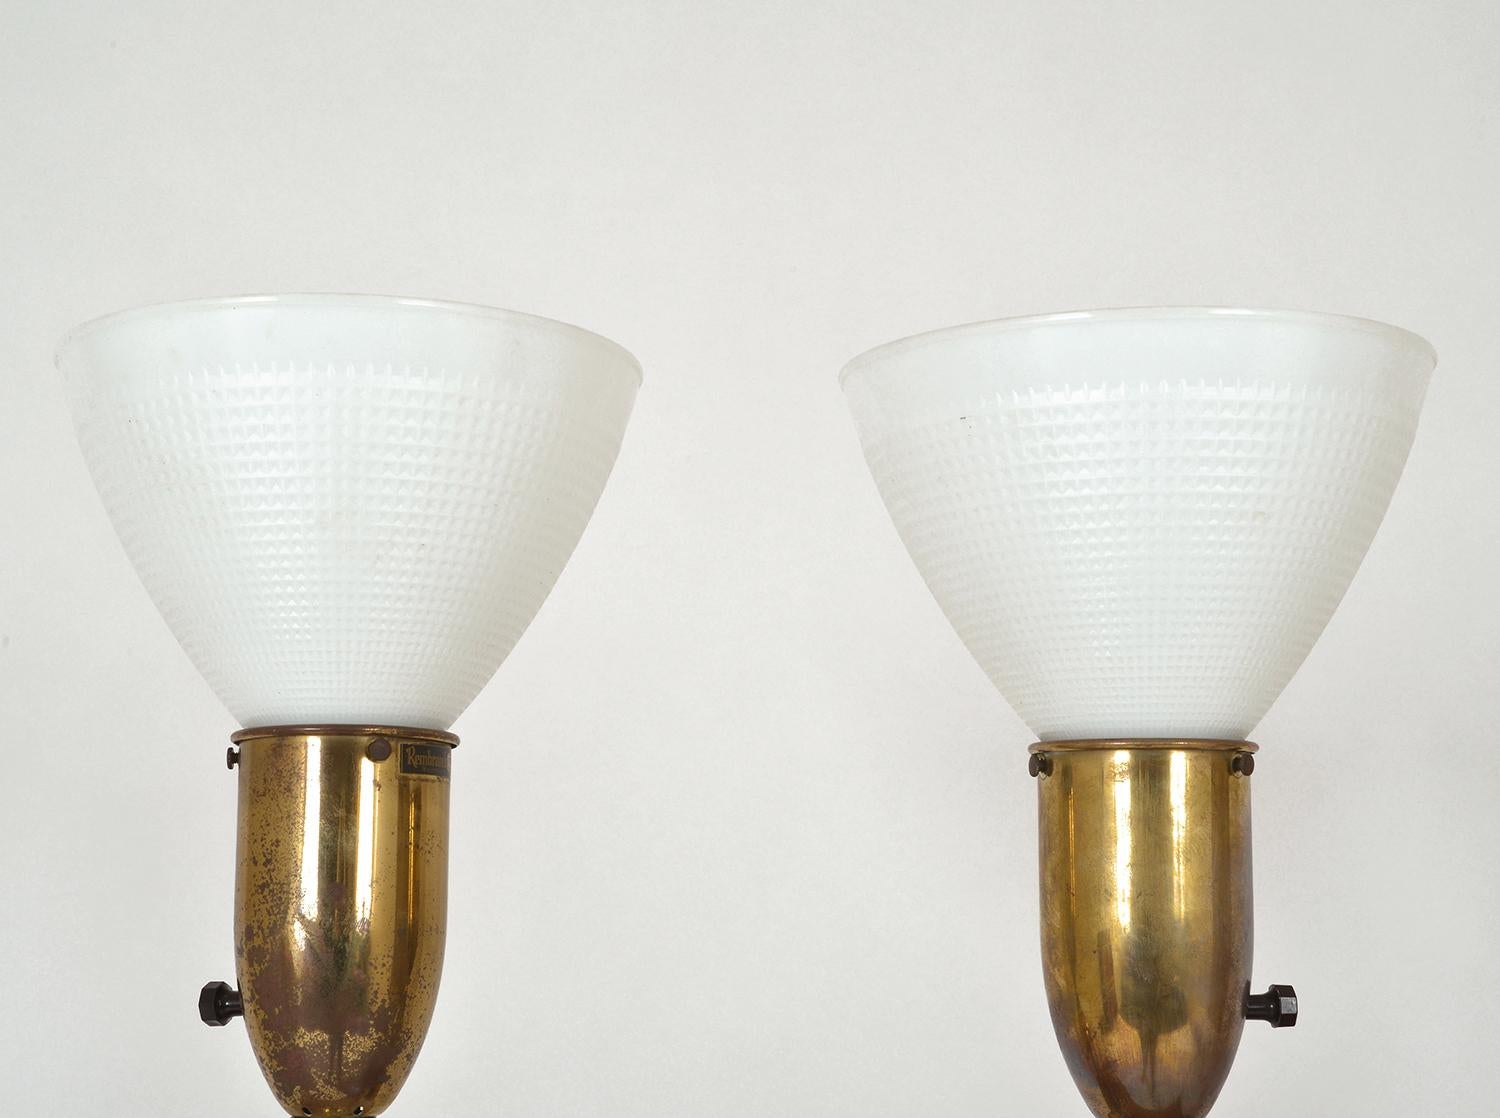 Pair of American Mid-Century Modern Obelisk Table Lamps by Rembrandt Lighting 10